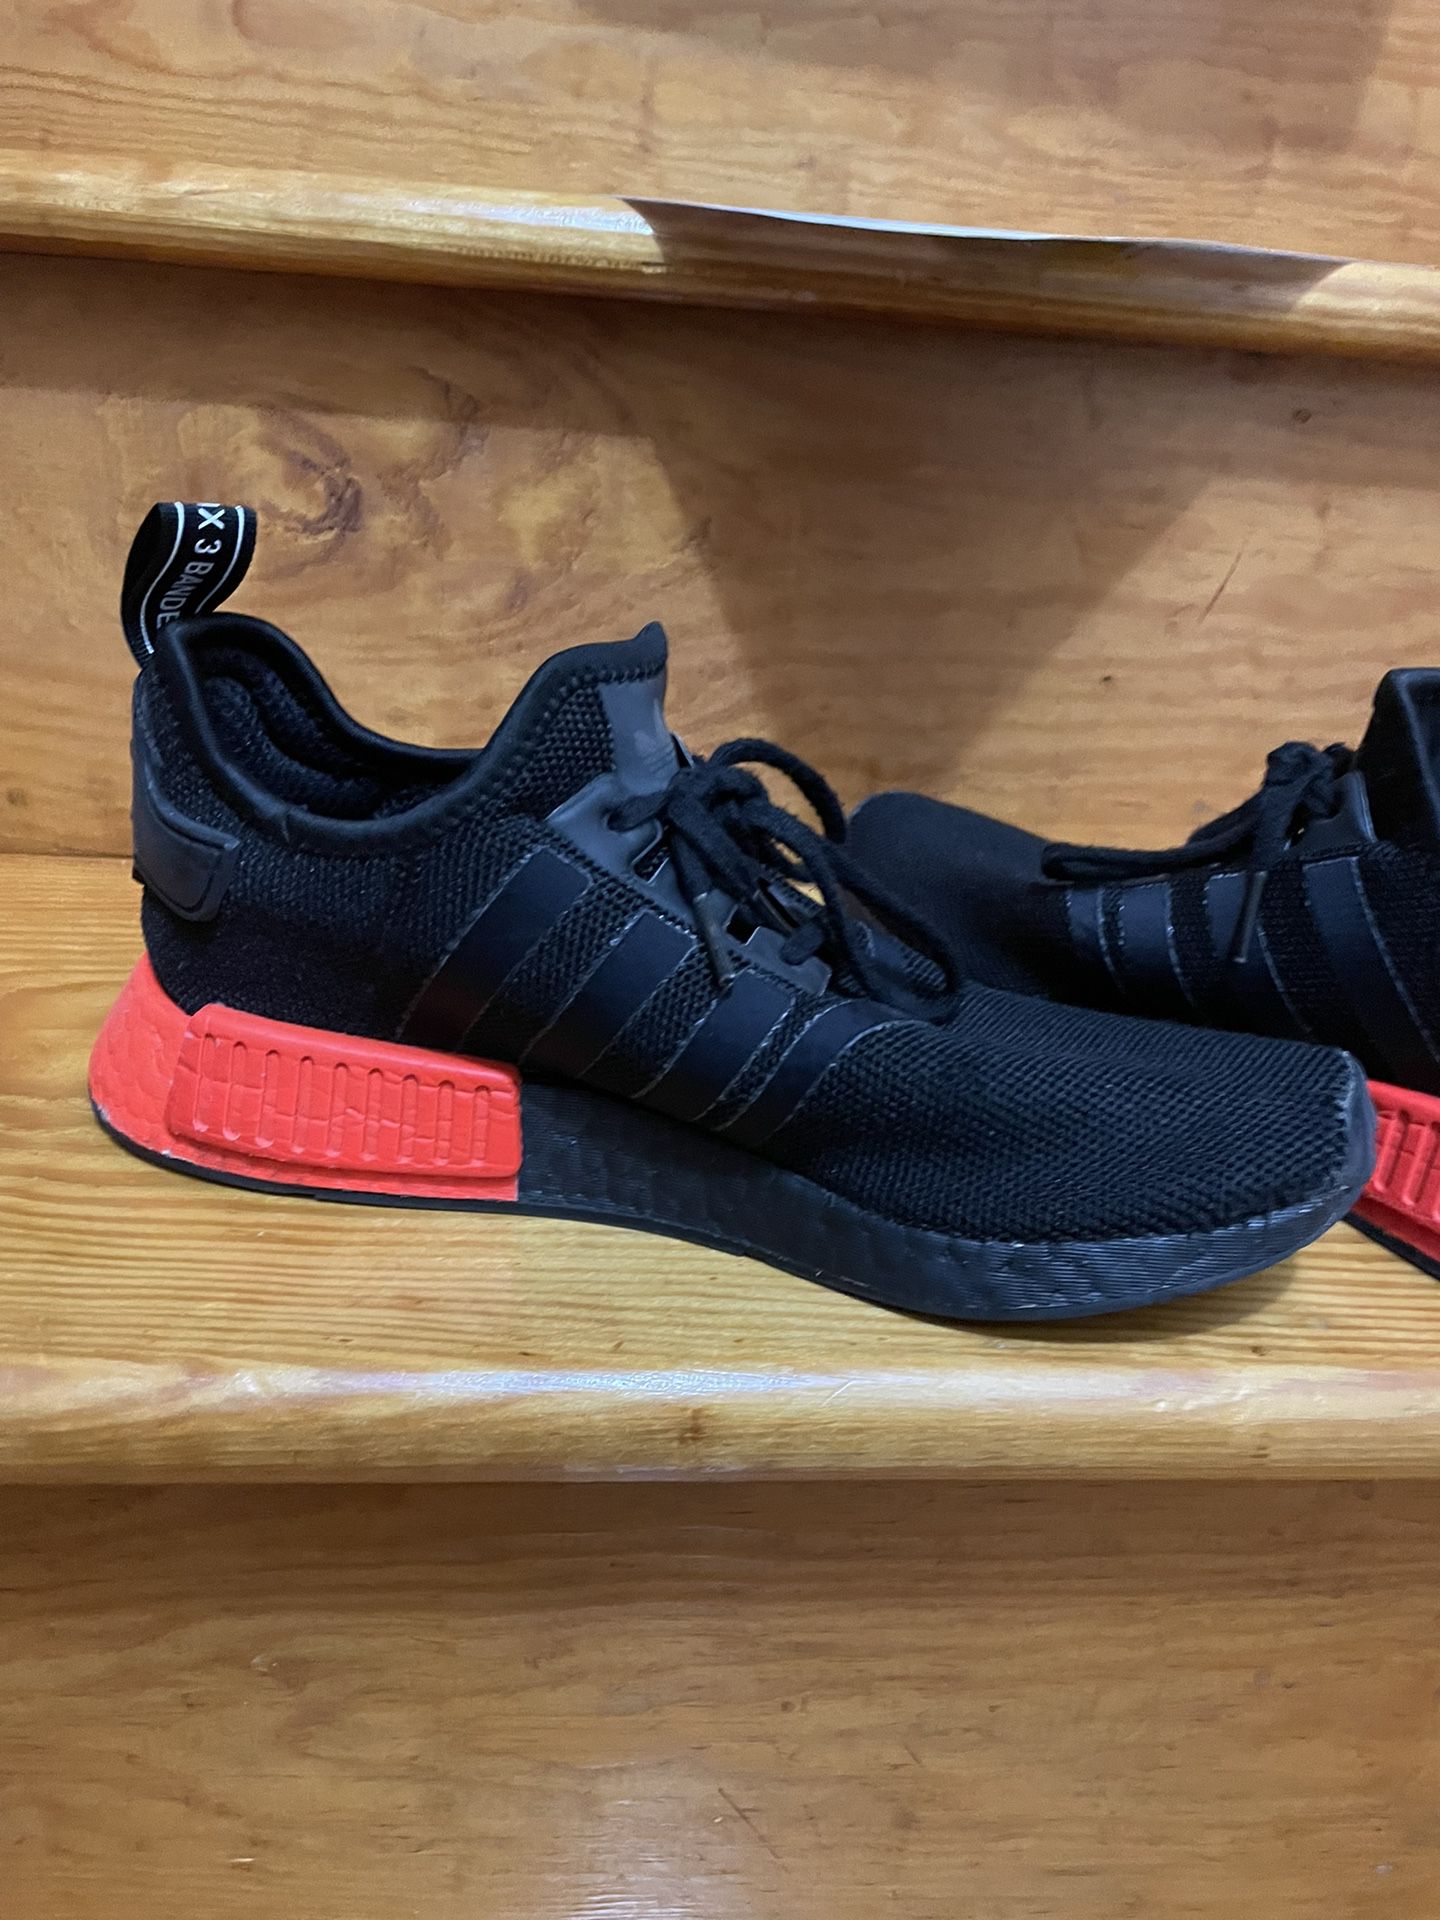 Nmd Adidas shoes For Boys 